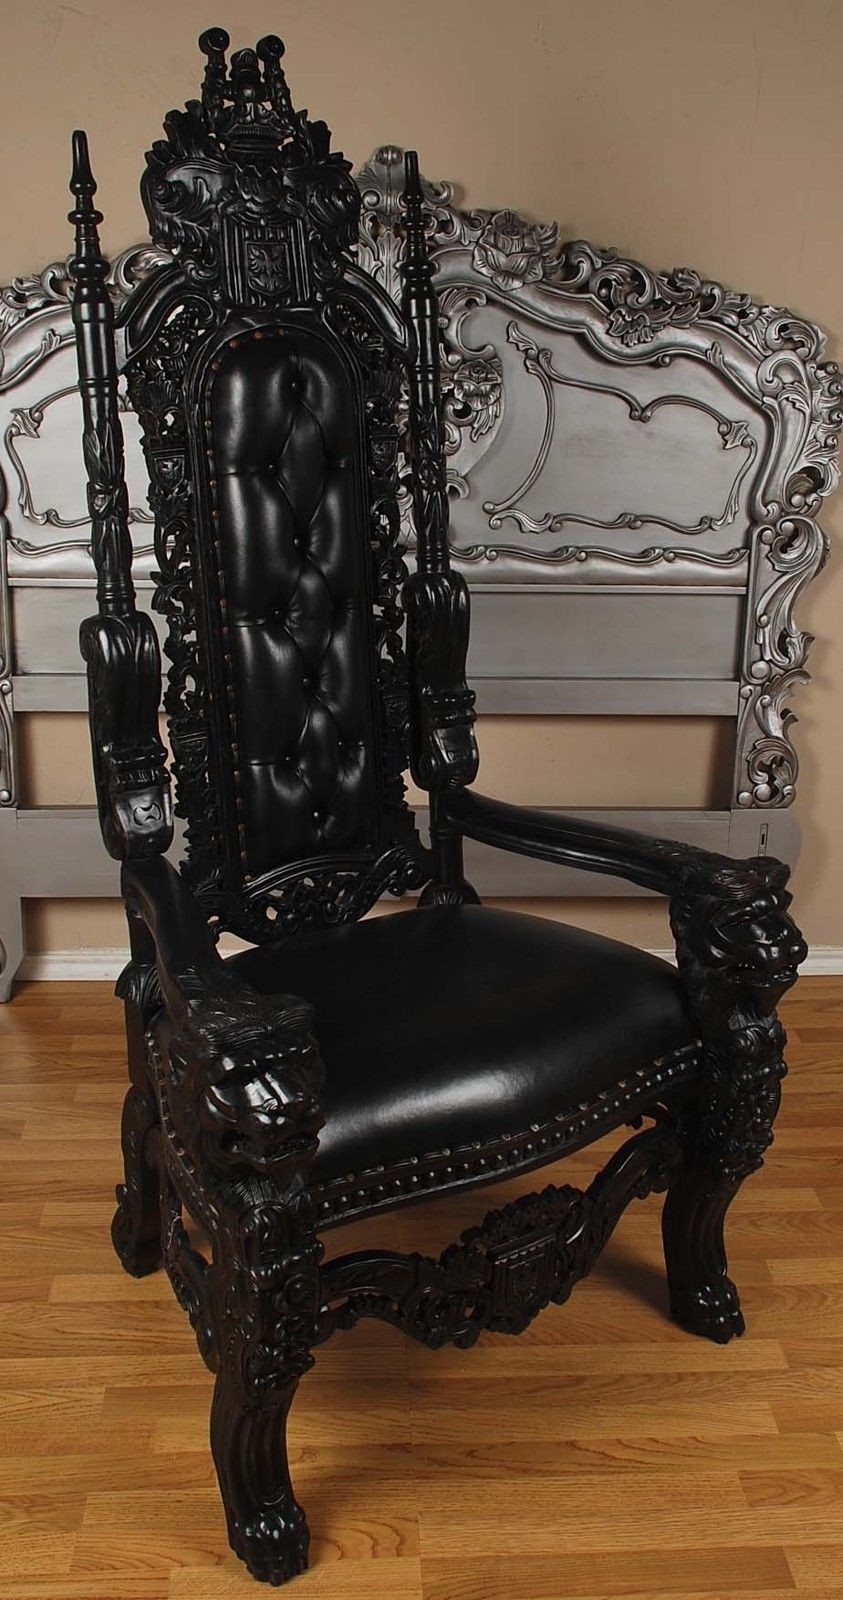 Carved Mahogany King Lion Gothic Throne Chair Black Paint Black Leather